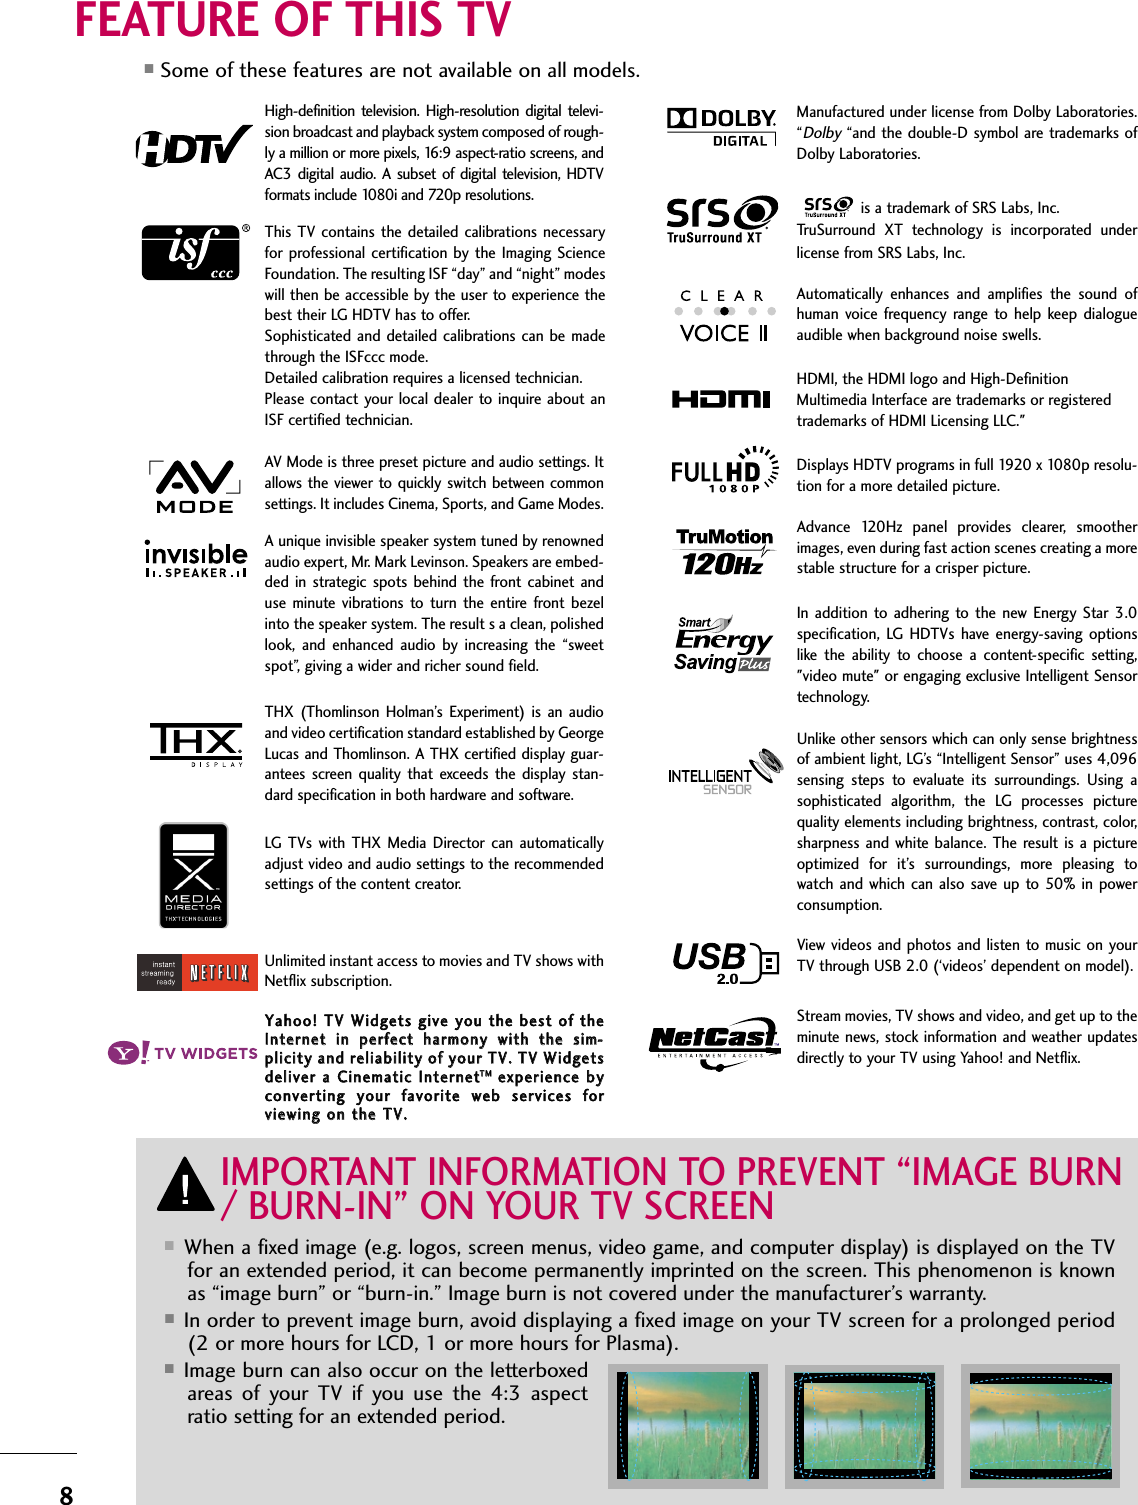 8FEATURE OF THIS TV■When a fixed image (e.g. logos, screen menus, video game, and computer display) is displayed on the TVfor an extended period, it can become permanently imprinted on the screen. This phenomenon is knownas “image burn” or “burn-in.” Image burn is not covered under the manufacturer’s warranty. ■In order to prevent image burn, avoid displaying a fixed image on your TV screen for a prolonged period(2 or more hours for LCD, 1 or more hours for Plasma). ■Image burn can also occur on the letterboxedareas  of  your  TV  if  you  use  the  4:3  aspectratio setting for an extended period.IMPORTANT INFORMATION TO PREVENT “IMAGE BURN/ BURN-IN” ON YOUR TV SCREENAV Mode is three preset picture and audio settings. Itallows  the  viewer to quickly switch between commonsettings. It includes Cinema, Sports, and Game Modes.Displays HDTV programs in full 1920 x 1080p resolu-tion for a more detailed picture.Automatically  enhances  and  amplifies  the  sound  ofhuman  voice  frequency  range  to  help  keep  dialogueaudible when background noise swells.A unique invisible speaker system tuned by renownedaudio expert, Mr. Mark Levinson. Speakers are embed-ded  in  strategic  spots  behind  the  front  cabinet anduse  minute  vibrations  to  turn  the  entire  front  bezelinto the speaker system. The result s a clean, polishedlook,  and  enhanced  audio  by  increasing  the  “sweetspot”, giving a wider and richer sound field.HDMI, the HDMI logo and High-DefinitionMultimedia Interface are trademarks or registeredtrademarks of HDMI Licensing LLC.&quot;is a trademark of SRS Labs, Inc.TruSurround  XT  technology  is  incorporated  underlicense from SRS Labs, Inc.Manufactured under license from Dolby Laboratories.“Dolby“and the double-D symbol are trademarks ofDolby Laboratories. This TV  contains  the  detailed  calibrations  necessaryfor  professional certification by the Imaging  ScienceFoundation. The resulting ISF “day” and “night” modeswill then be accessible by the user to experience thebest their LG HDTV has to offer.Sophisticated  and  detailed calibrations  can  be madethrough the ISFccc mode.Detailed calibration requires a licensed technician.Please contact  your local dealer to inquire about anISF certified technician.High-definition  television.  High-resolution  digital  televi-sion broadcast and playback system composed of rough-ly a million or more pixels, 16:9 aspect-ratio screens, andAC3  digital audio.  A  subset  of digital television,  HDTVformats include 1080i and 720p resolutions.THX  (Thomlinson  Holman’s  Experiment)  is  an  audioand video certification standard established by GeorgeLucas and  Thomlinson. A THX certified display guar-antees  screen  quality  that  exceeds  the  display  stan-dard specification in both hardware and software.YYaahhoooo!!  TTVV  WWiiddggeettss  ggiivvee  yyoouu  tthhee  bbeesstt  ooff  tthheeIInntteerrnneett  iinn  ppeerrffeecctt  hhaarrmmoonnyy  wwiitthh  tthhee  ssiimm--pplliicciittyy  aanndd  rreelliiaabbiilliittyy  ooff  yyoouurr  TTVV..  TTVV  WWiiddggeettssddeelliivveerr  aa  CCiinneemmaattiicc  IInntteerrnneettTTMMeexxppeerriieennccee  bbyyccoonnvveerrttiinngg  yyoouurr  ffaavvoorriittee  wweebb  sseerrvviicceess  ffoorrvviieewwiinngg  oonn  tthhee  TTVV..LG  TVs  with  THX Media  Director  can  automaticallyadjust video and audio settings to the recommendedsettings of the content creator. Unlimited instant access to movies and TV shows withNetflix subscription. Advance  120Hz  panel  provides  clearer,  smootherimages, even during fast action scenes creating a morestable structure for a crisper picture. In  addition to adhering  to  the  new  Energy  Star  3.0specification,  LG  HDTVs  have  energy-saving  optionslike  the  ability  to  choose  a  content-specific  setting,&quot;video mute&quot; or engaging exclusive Intelligent Sensortechnology. Unlike other sensors which can only sense brightnessof ambient light, LG’s “Intelligent Sensor” uses 4,096sensing  steps  to  evaluate  its  surroundings.  Using  asophisticated  algorithm,  the  LG  processes  picturequality elements including brightness, contrast, color,sharpness and  white balance. The  result is  a  pictureoptimized  for  it’s  surroundings,  more  pleasing  towatch and  which can also  save up to 50%  in  powerconsumption. Stream movies, TV shows and video, and get up to theminute news, stock information and weather updatesdirectly to your TV using Yahoo! and Netflix.View videos and photos and listen to music on yourTV through USB 2.0 (‘videos’ dependent on model).■Some of these features are not available on all models.